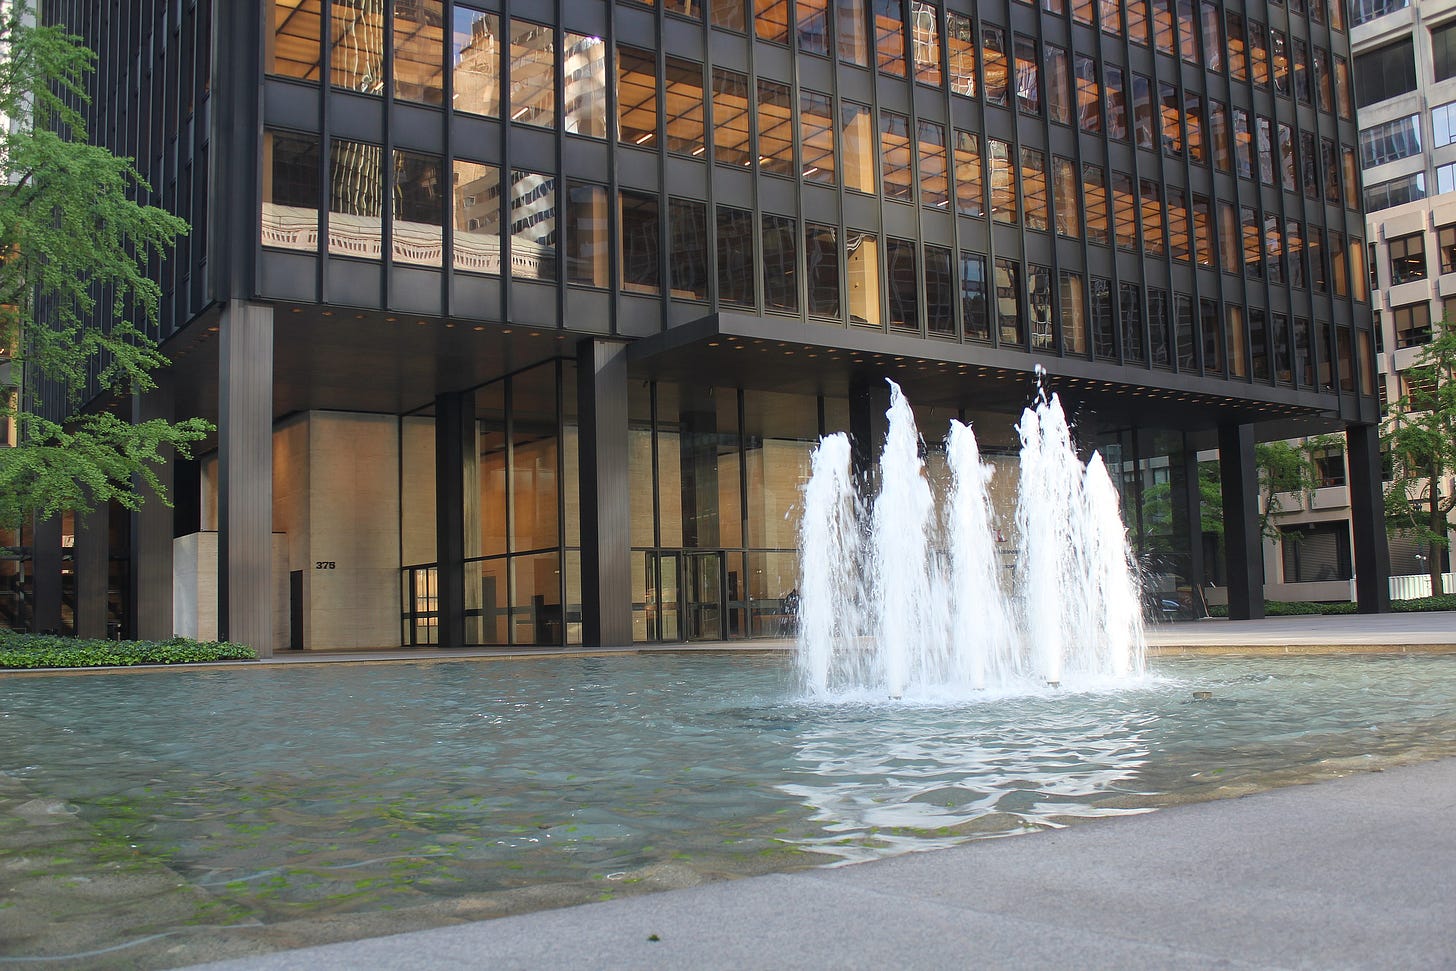 Fountain in front of the building